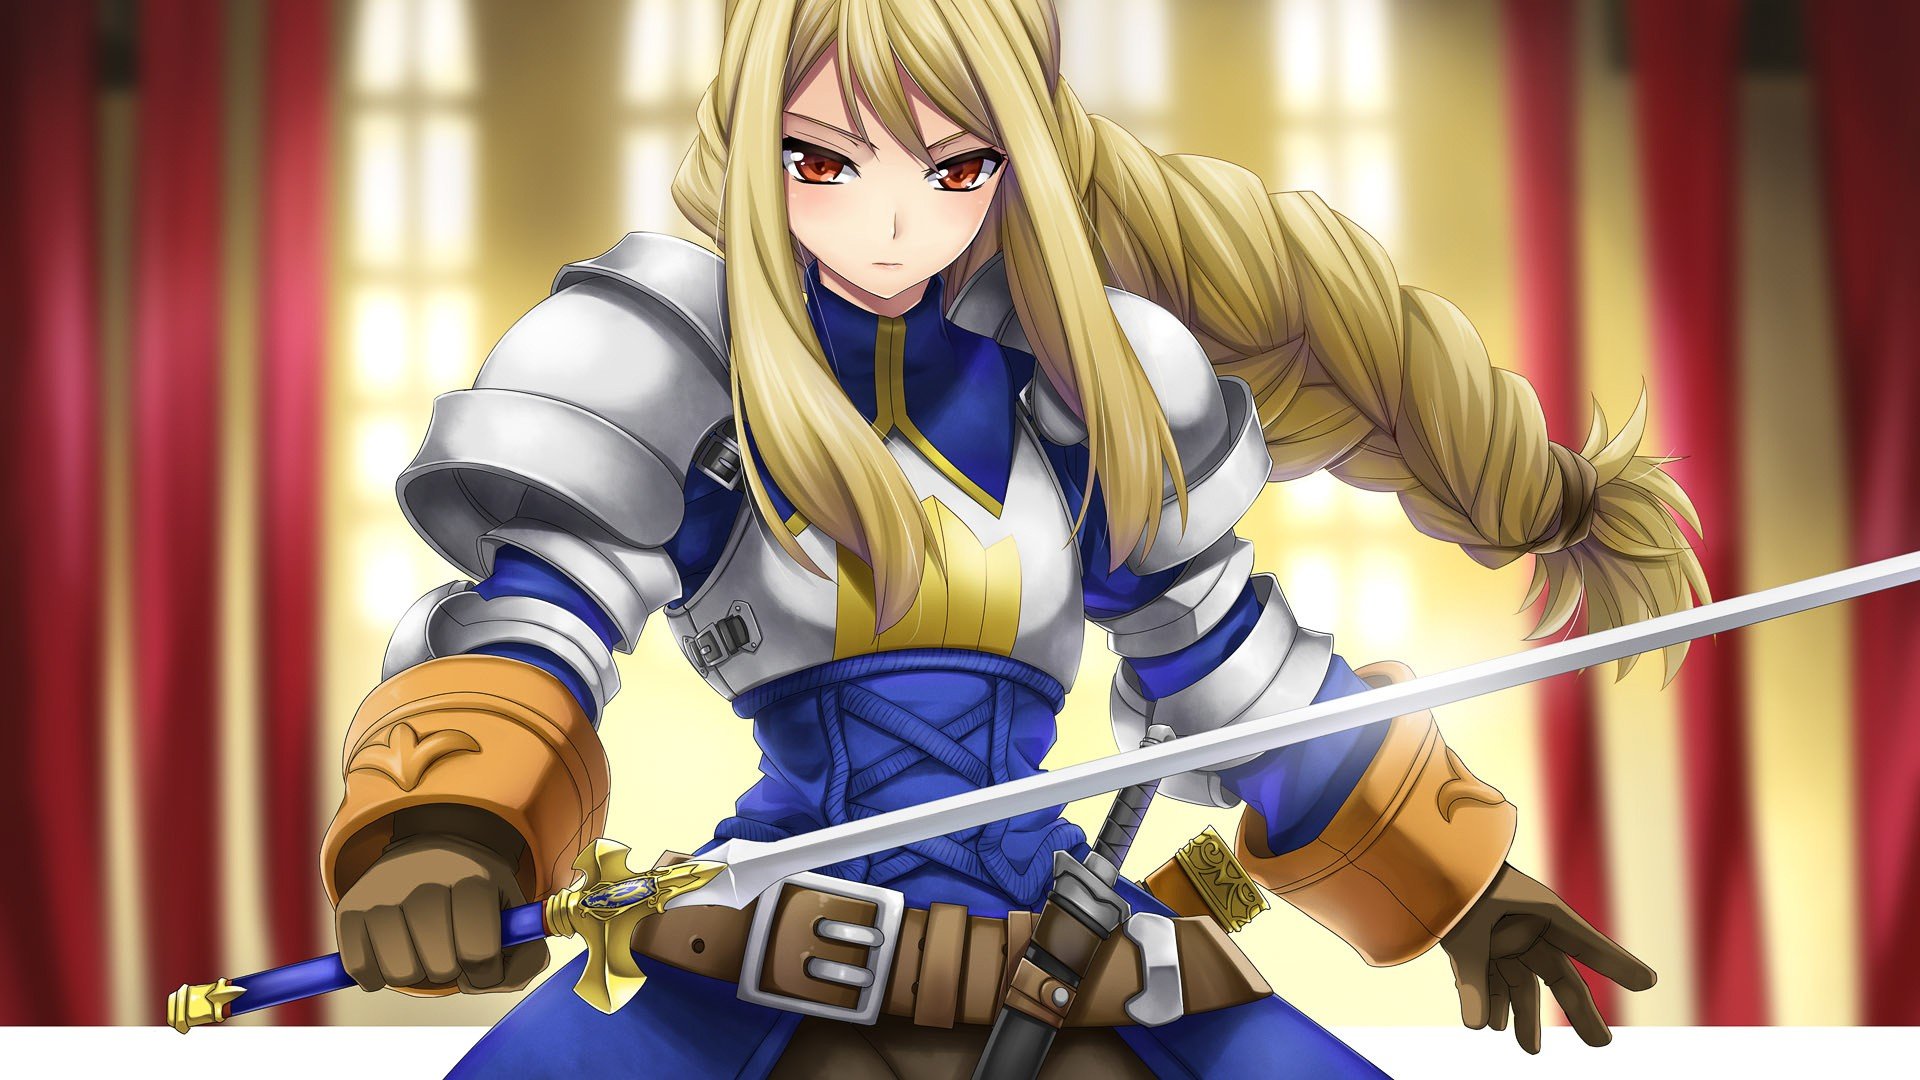 blonde, Final Fantasy Tactics, Agrias Oaks, Anime girls, Knights, Anime  Wallpapers HD / Desktop and Mobile Backgrounds